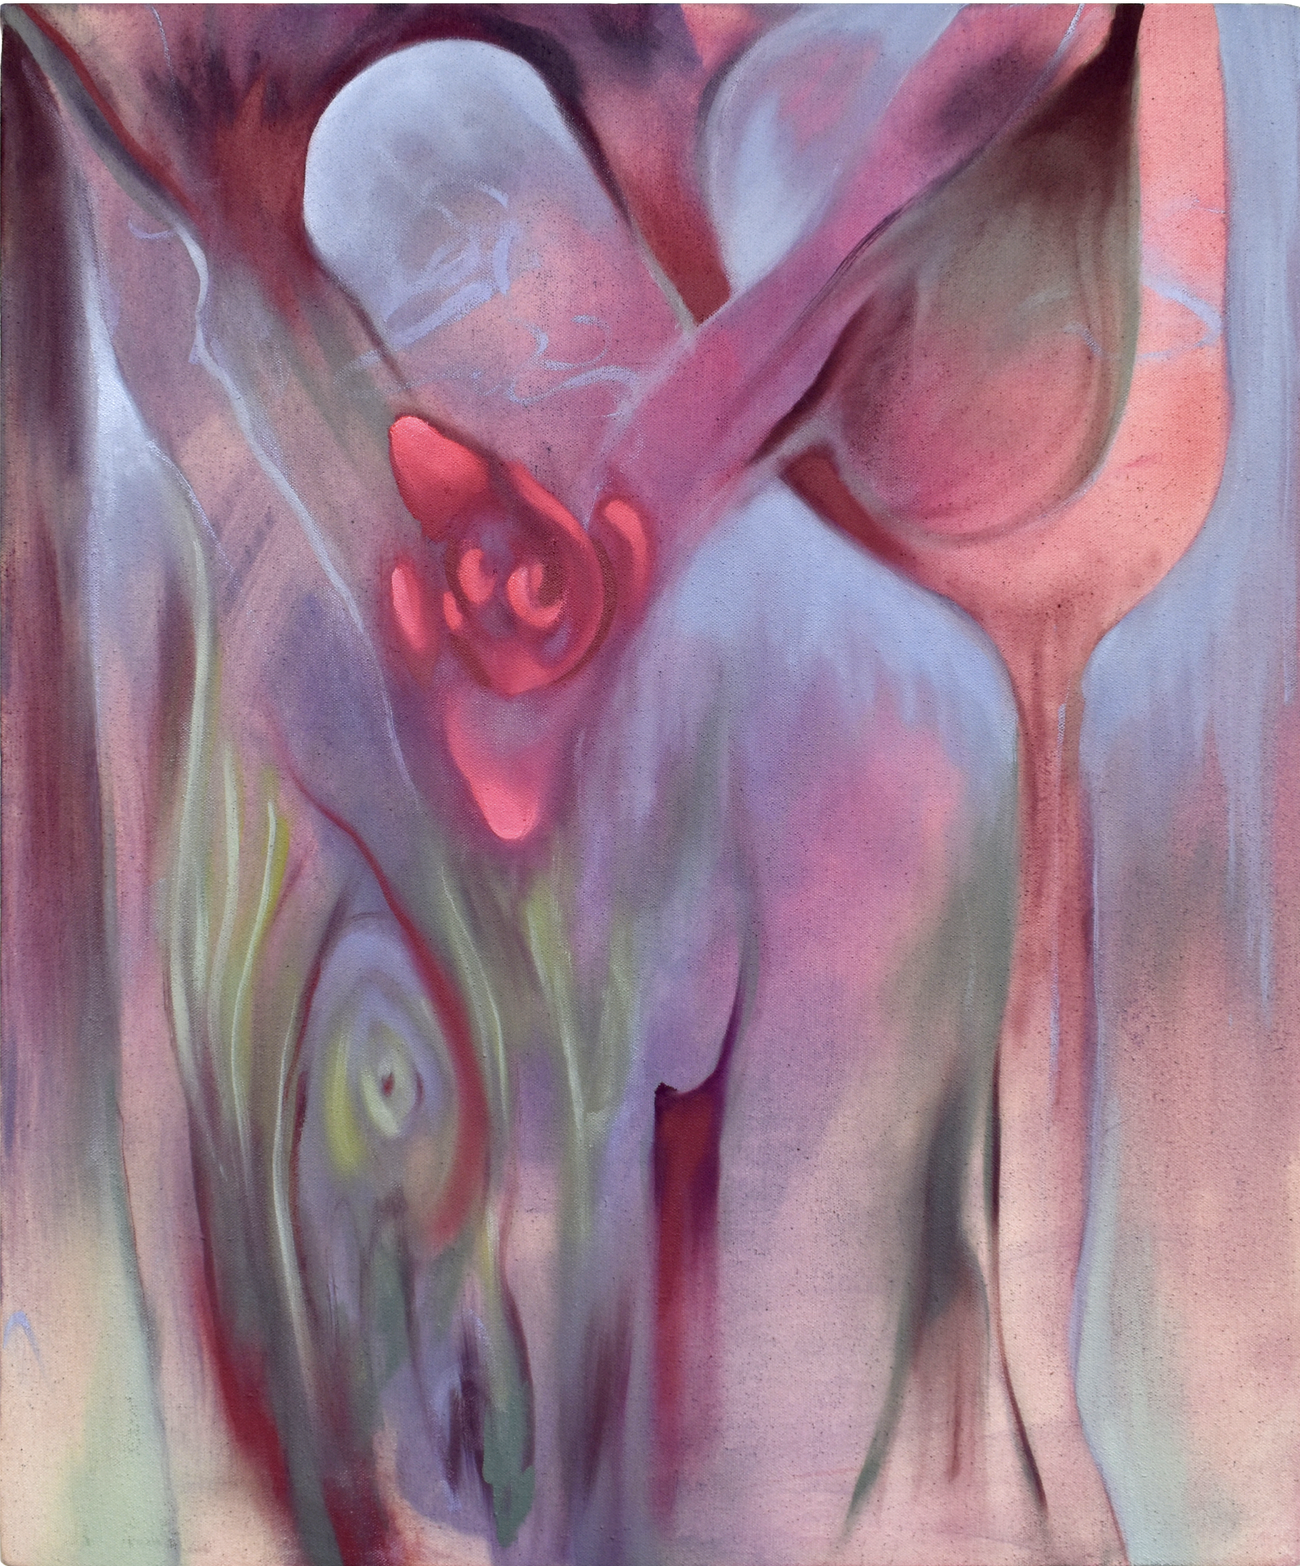 Rebecca Poarch, "Relinquished Desire, A Sleeping Body," Oil and ink on canvas, 20in x 24in, 2022.